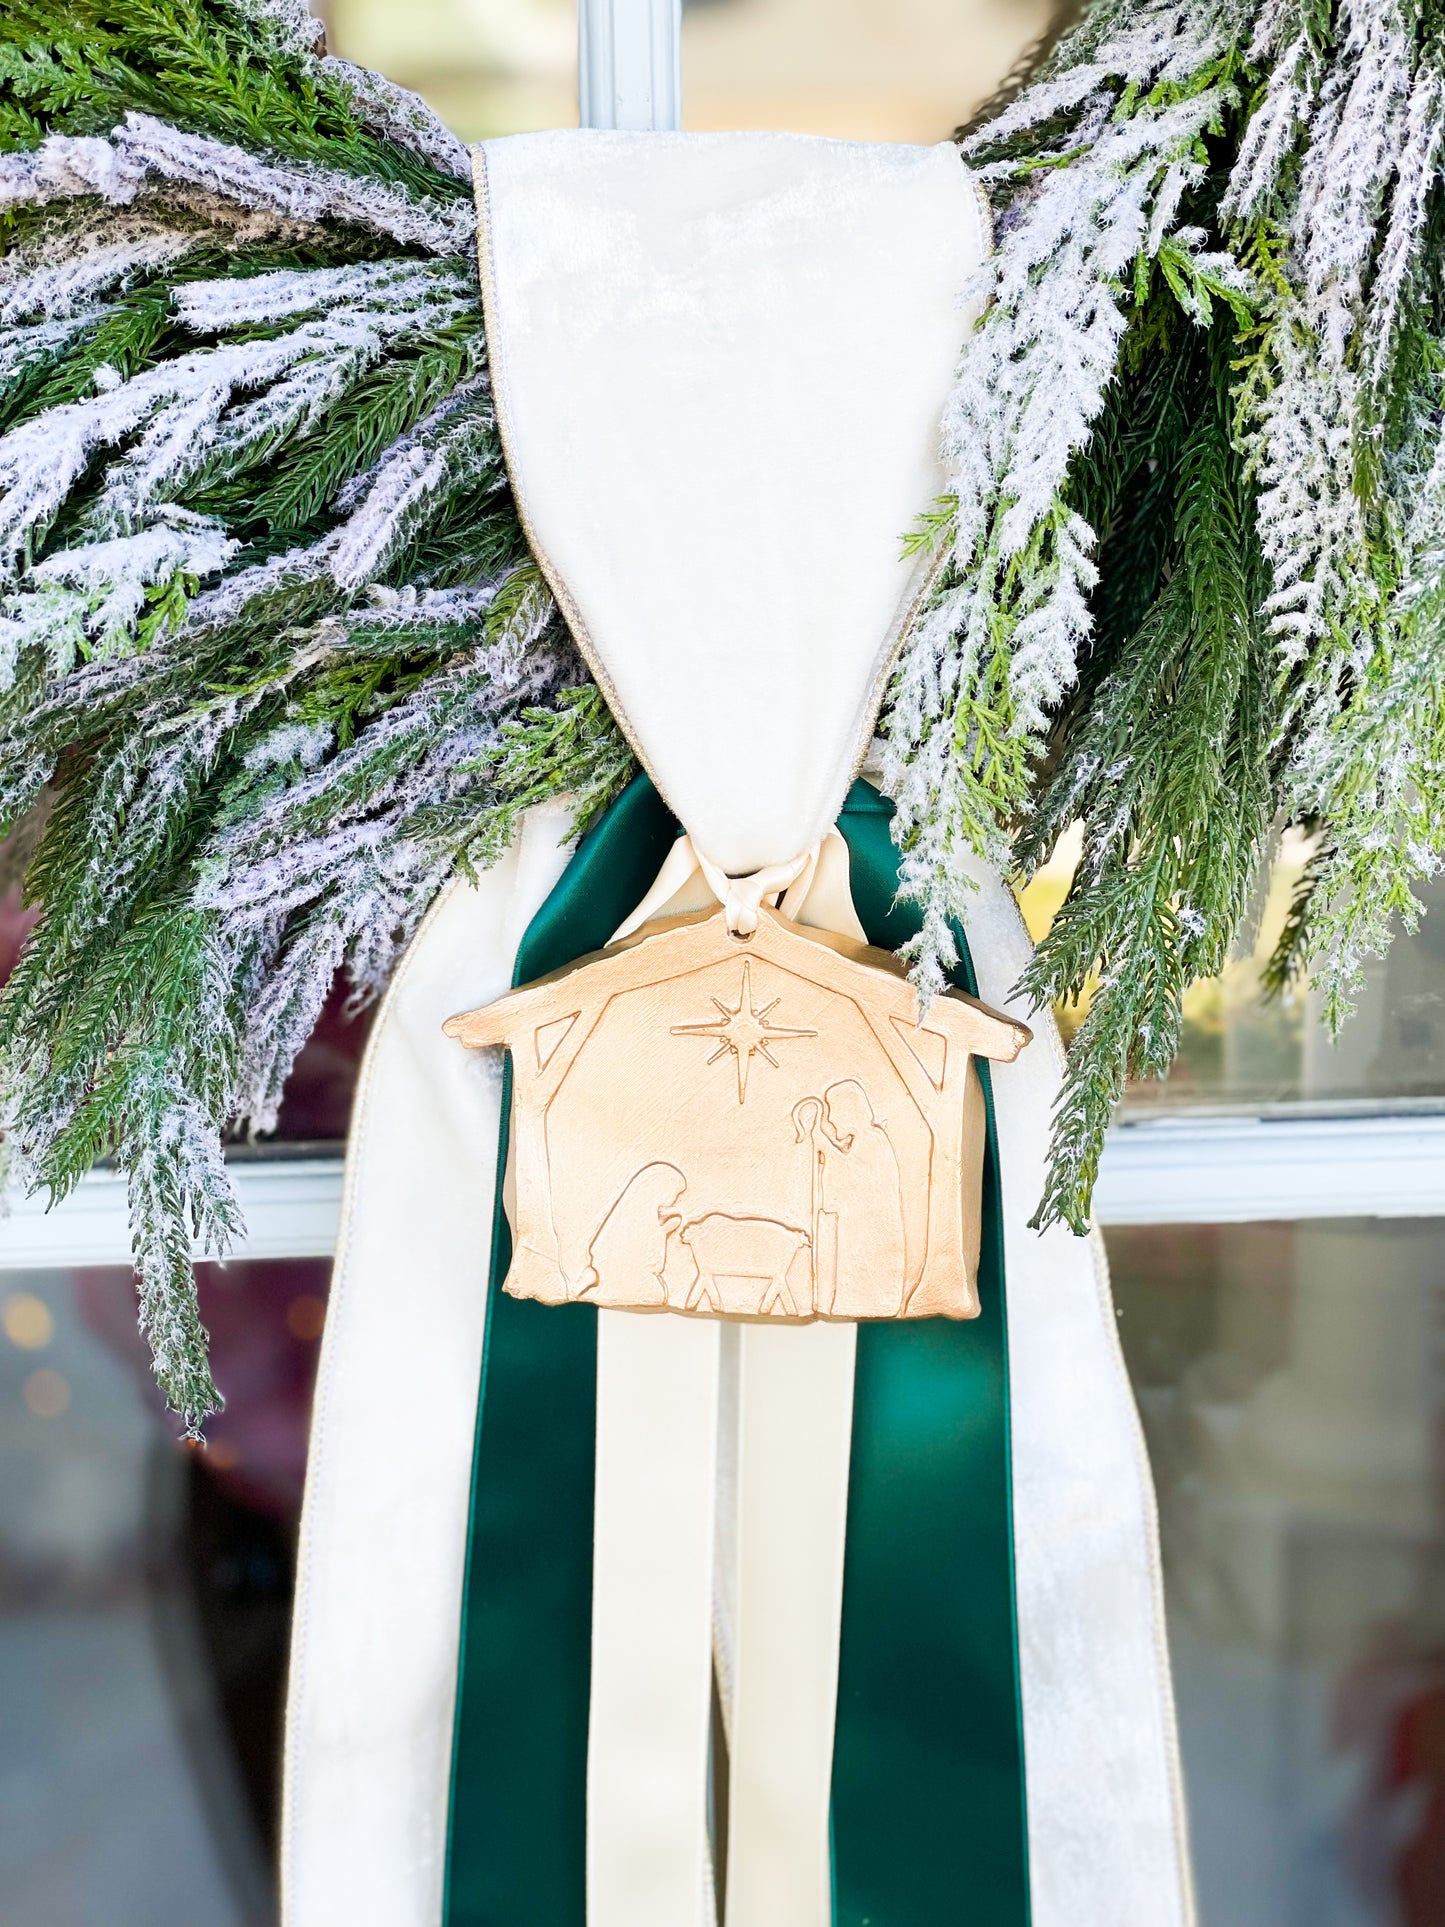 Emmanuel Wreath And Sash With Gold Nativity Ornament